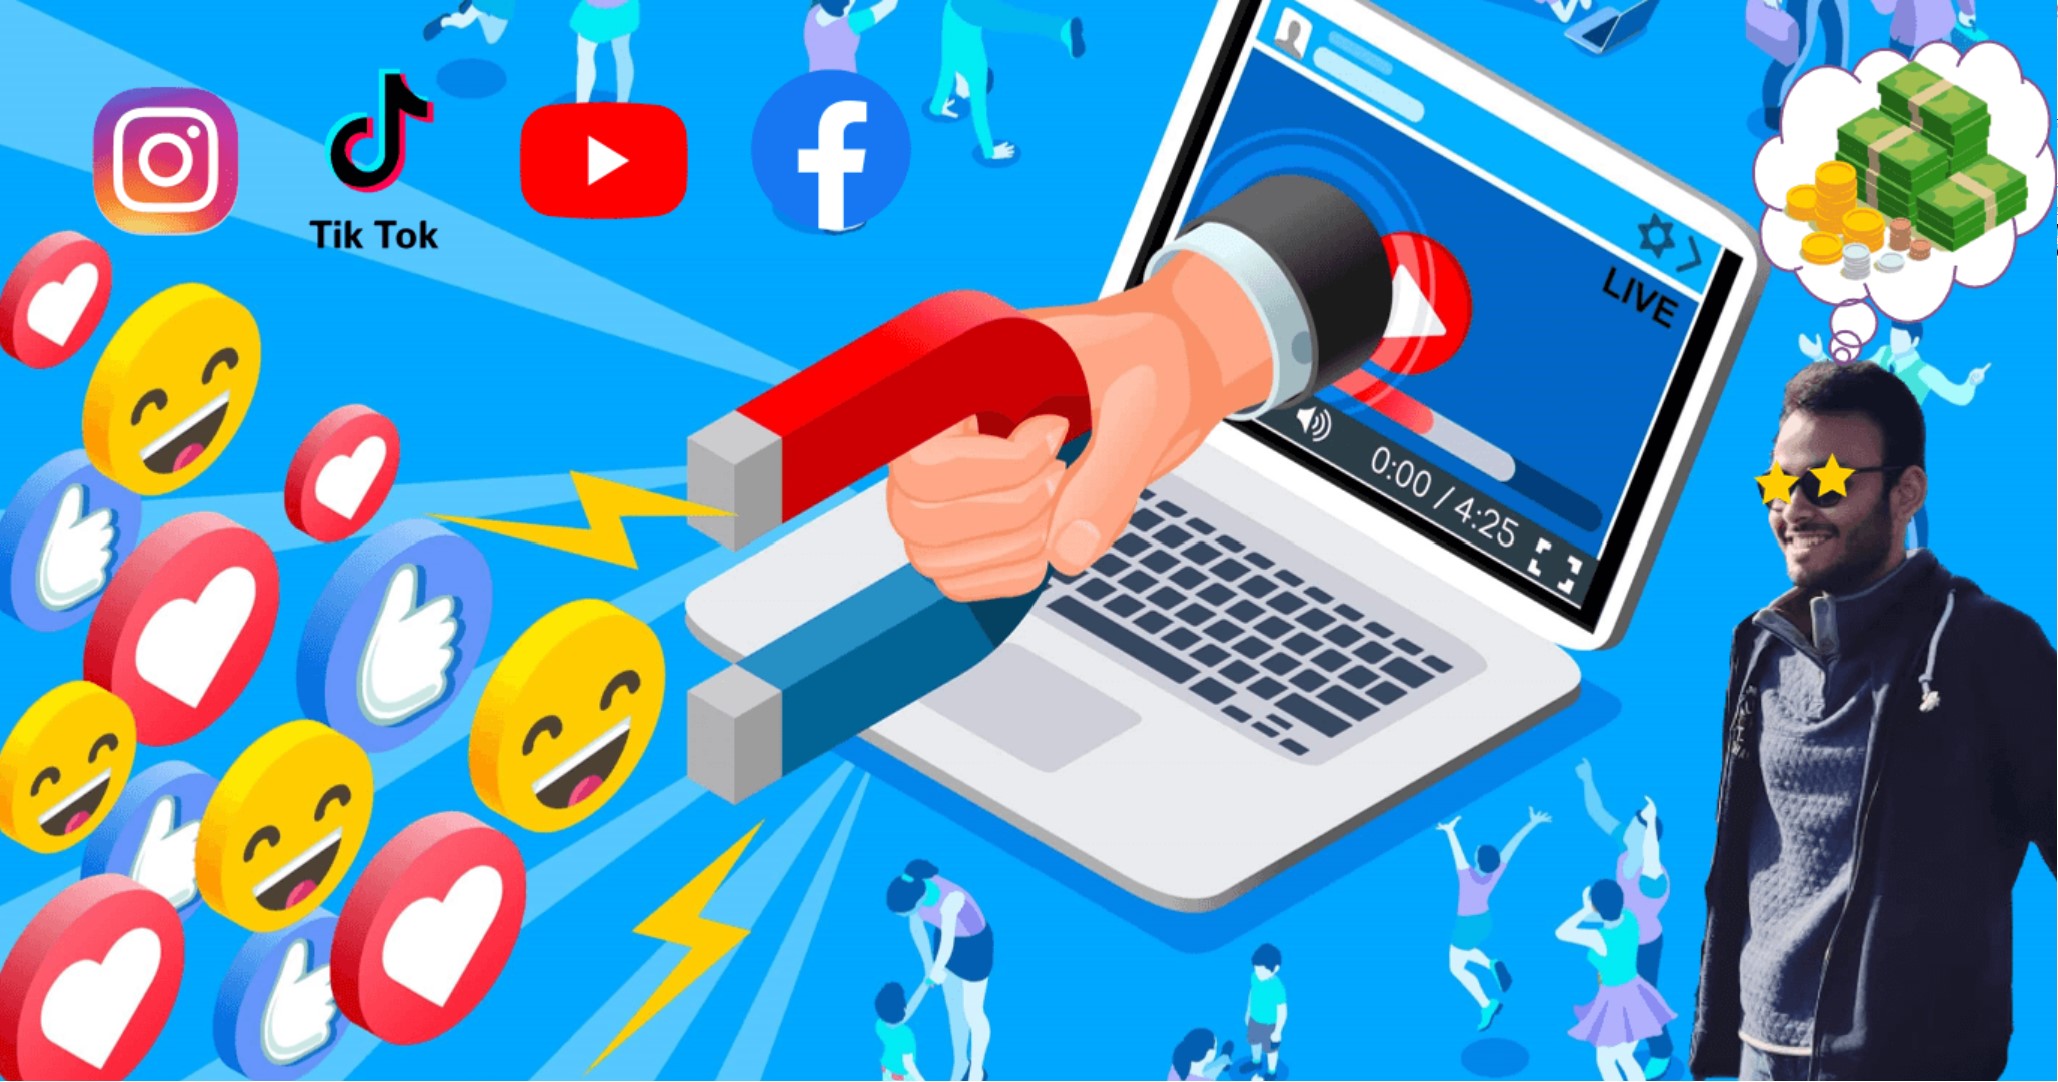 Fake reviews – ACCC crackdown on dodgy social media influencers